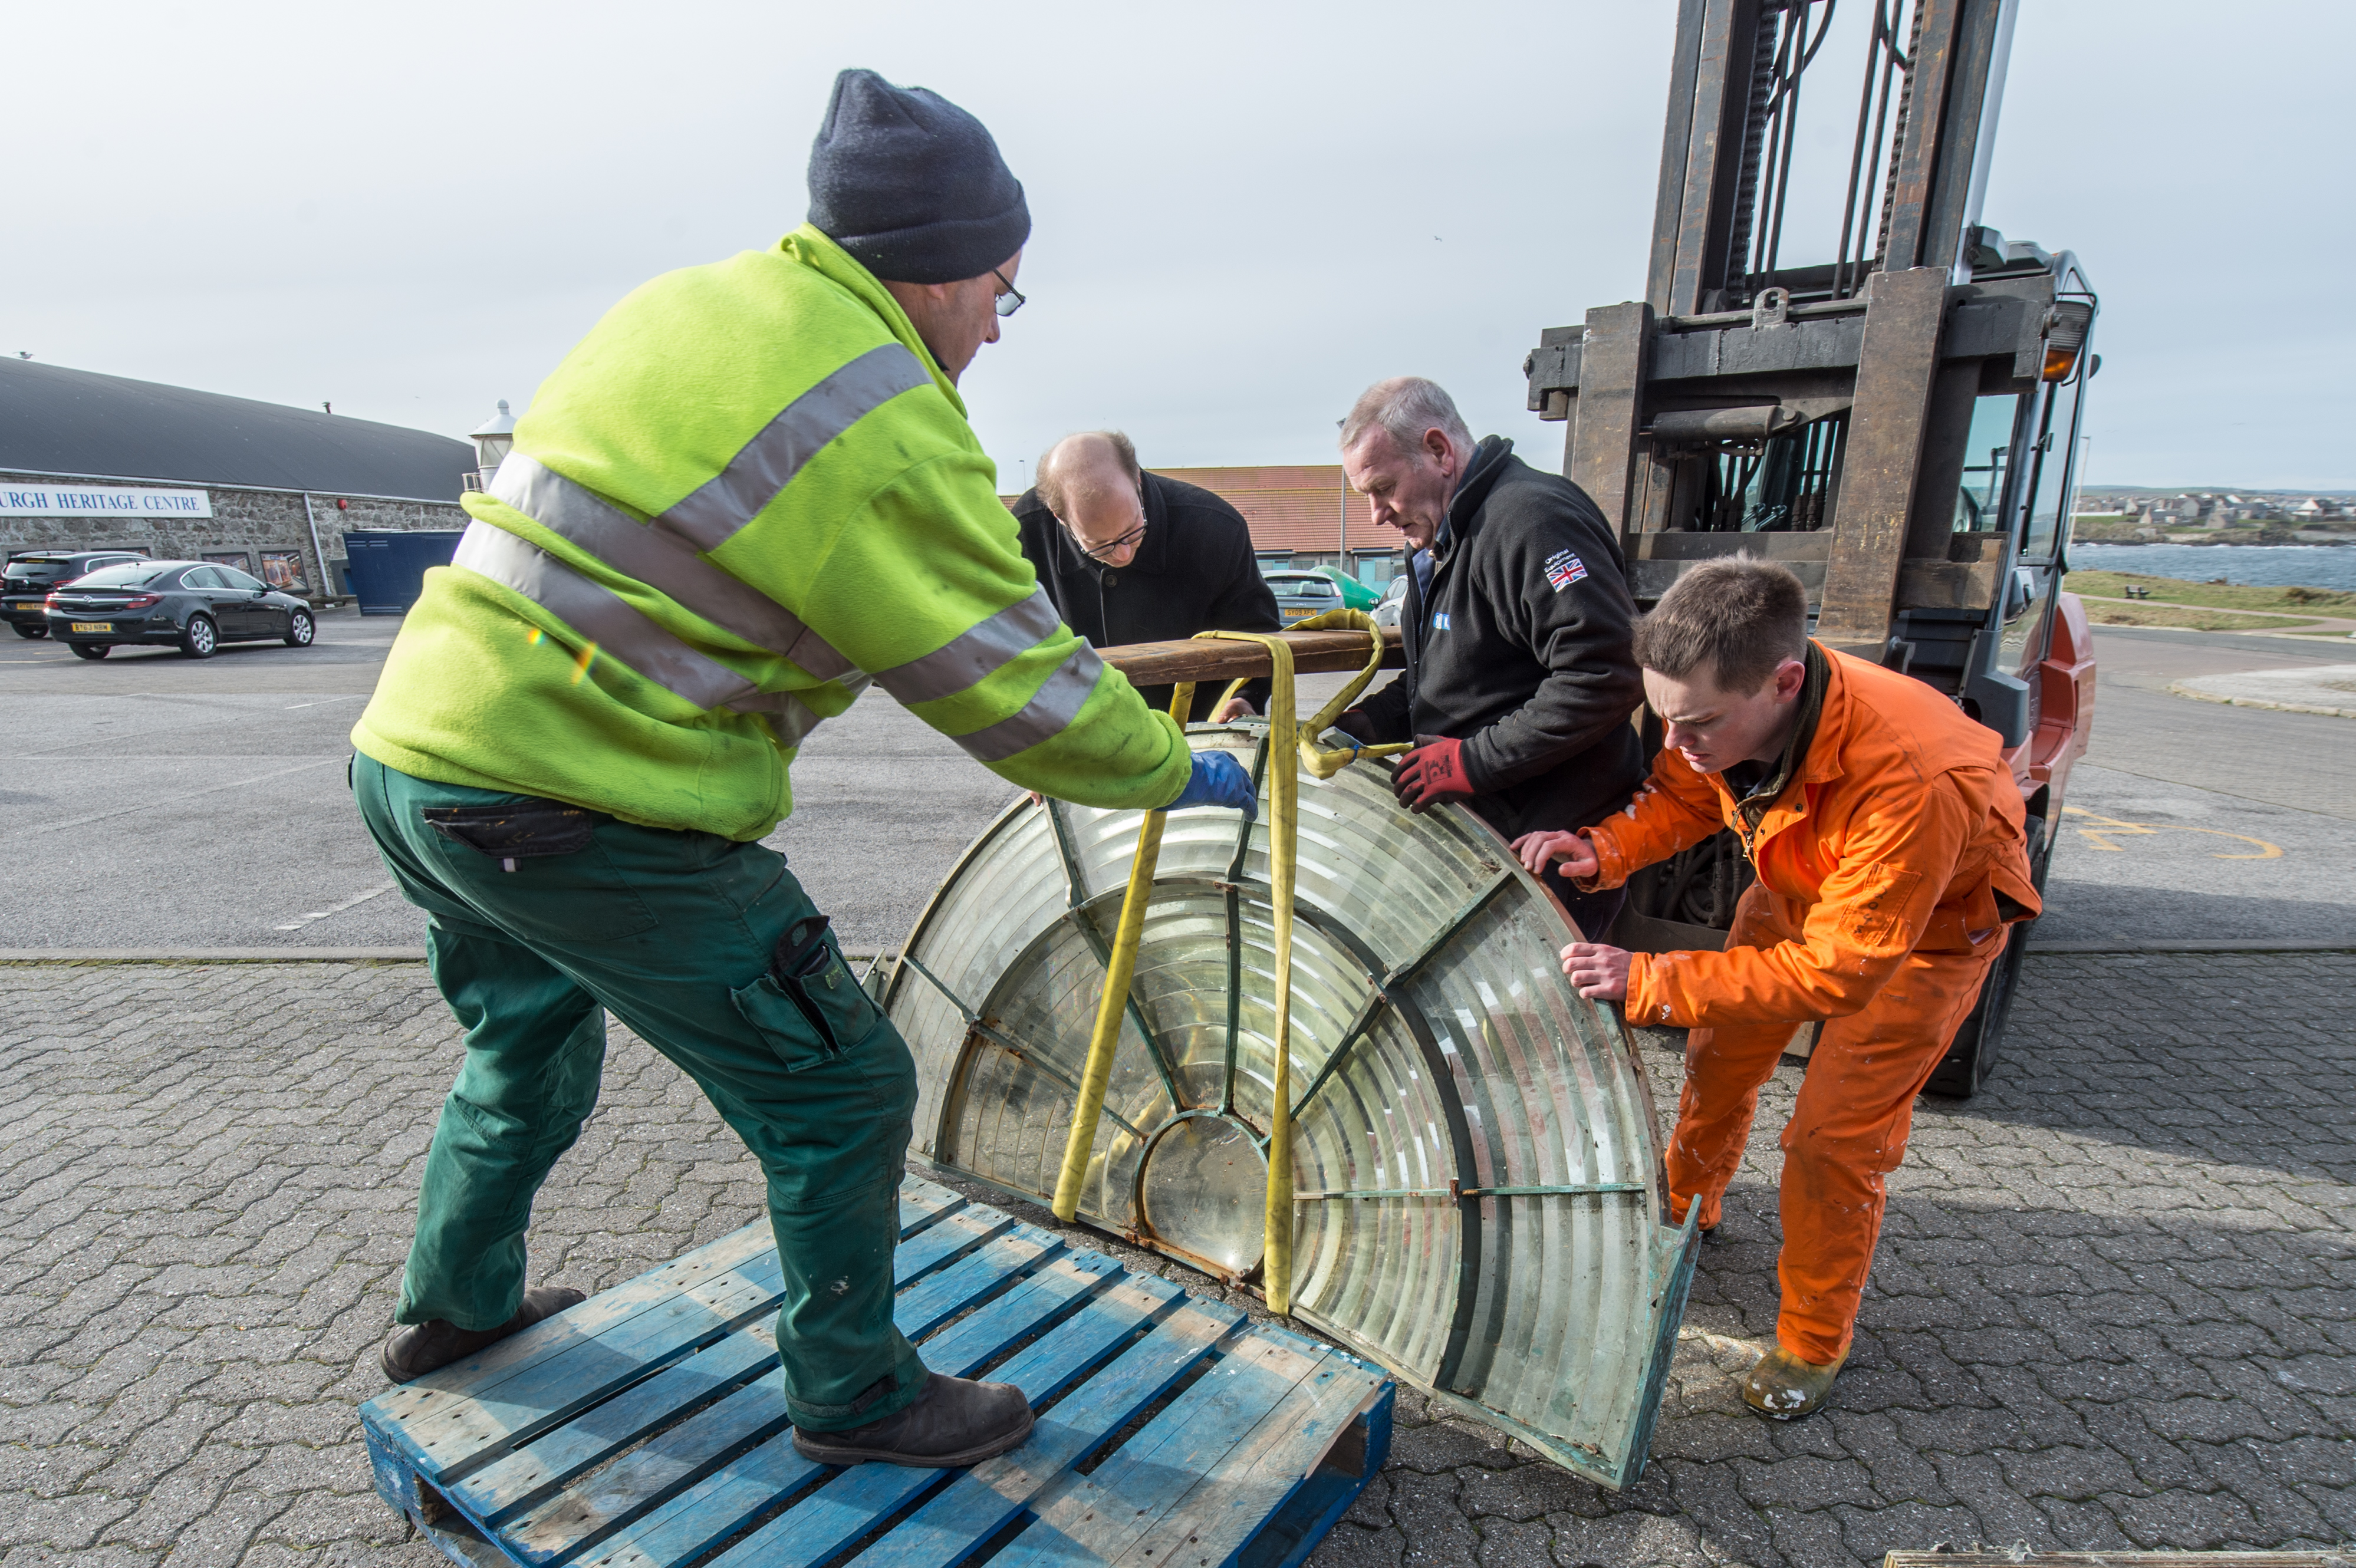 Picture by JASON HEDGES    

Pictures document the arrival of a new lighthouse lens delivered to the Lighthouse museum in Fraserburgh, Aberdeenshire today.

Picture: Lenses arfe man handled onto the crate

Pictures Jason Hedges